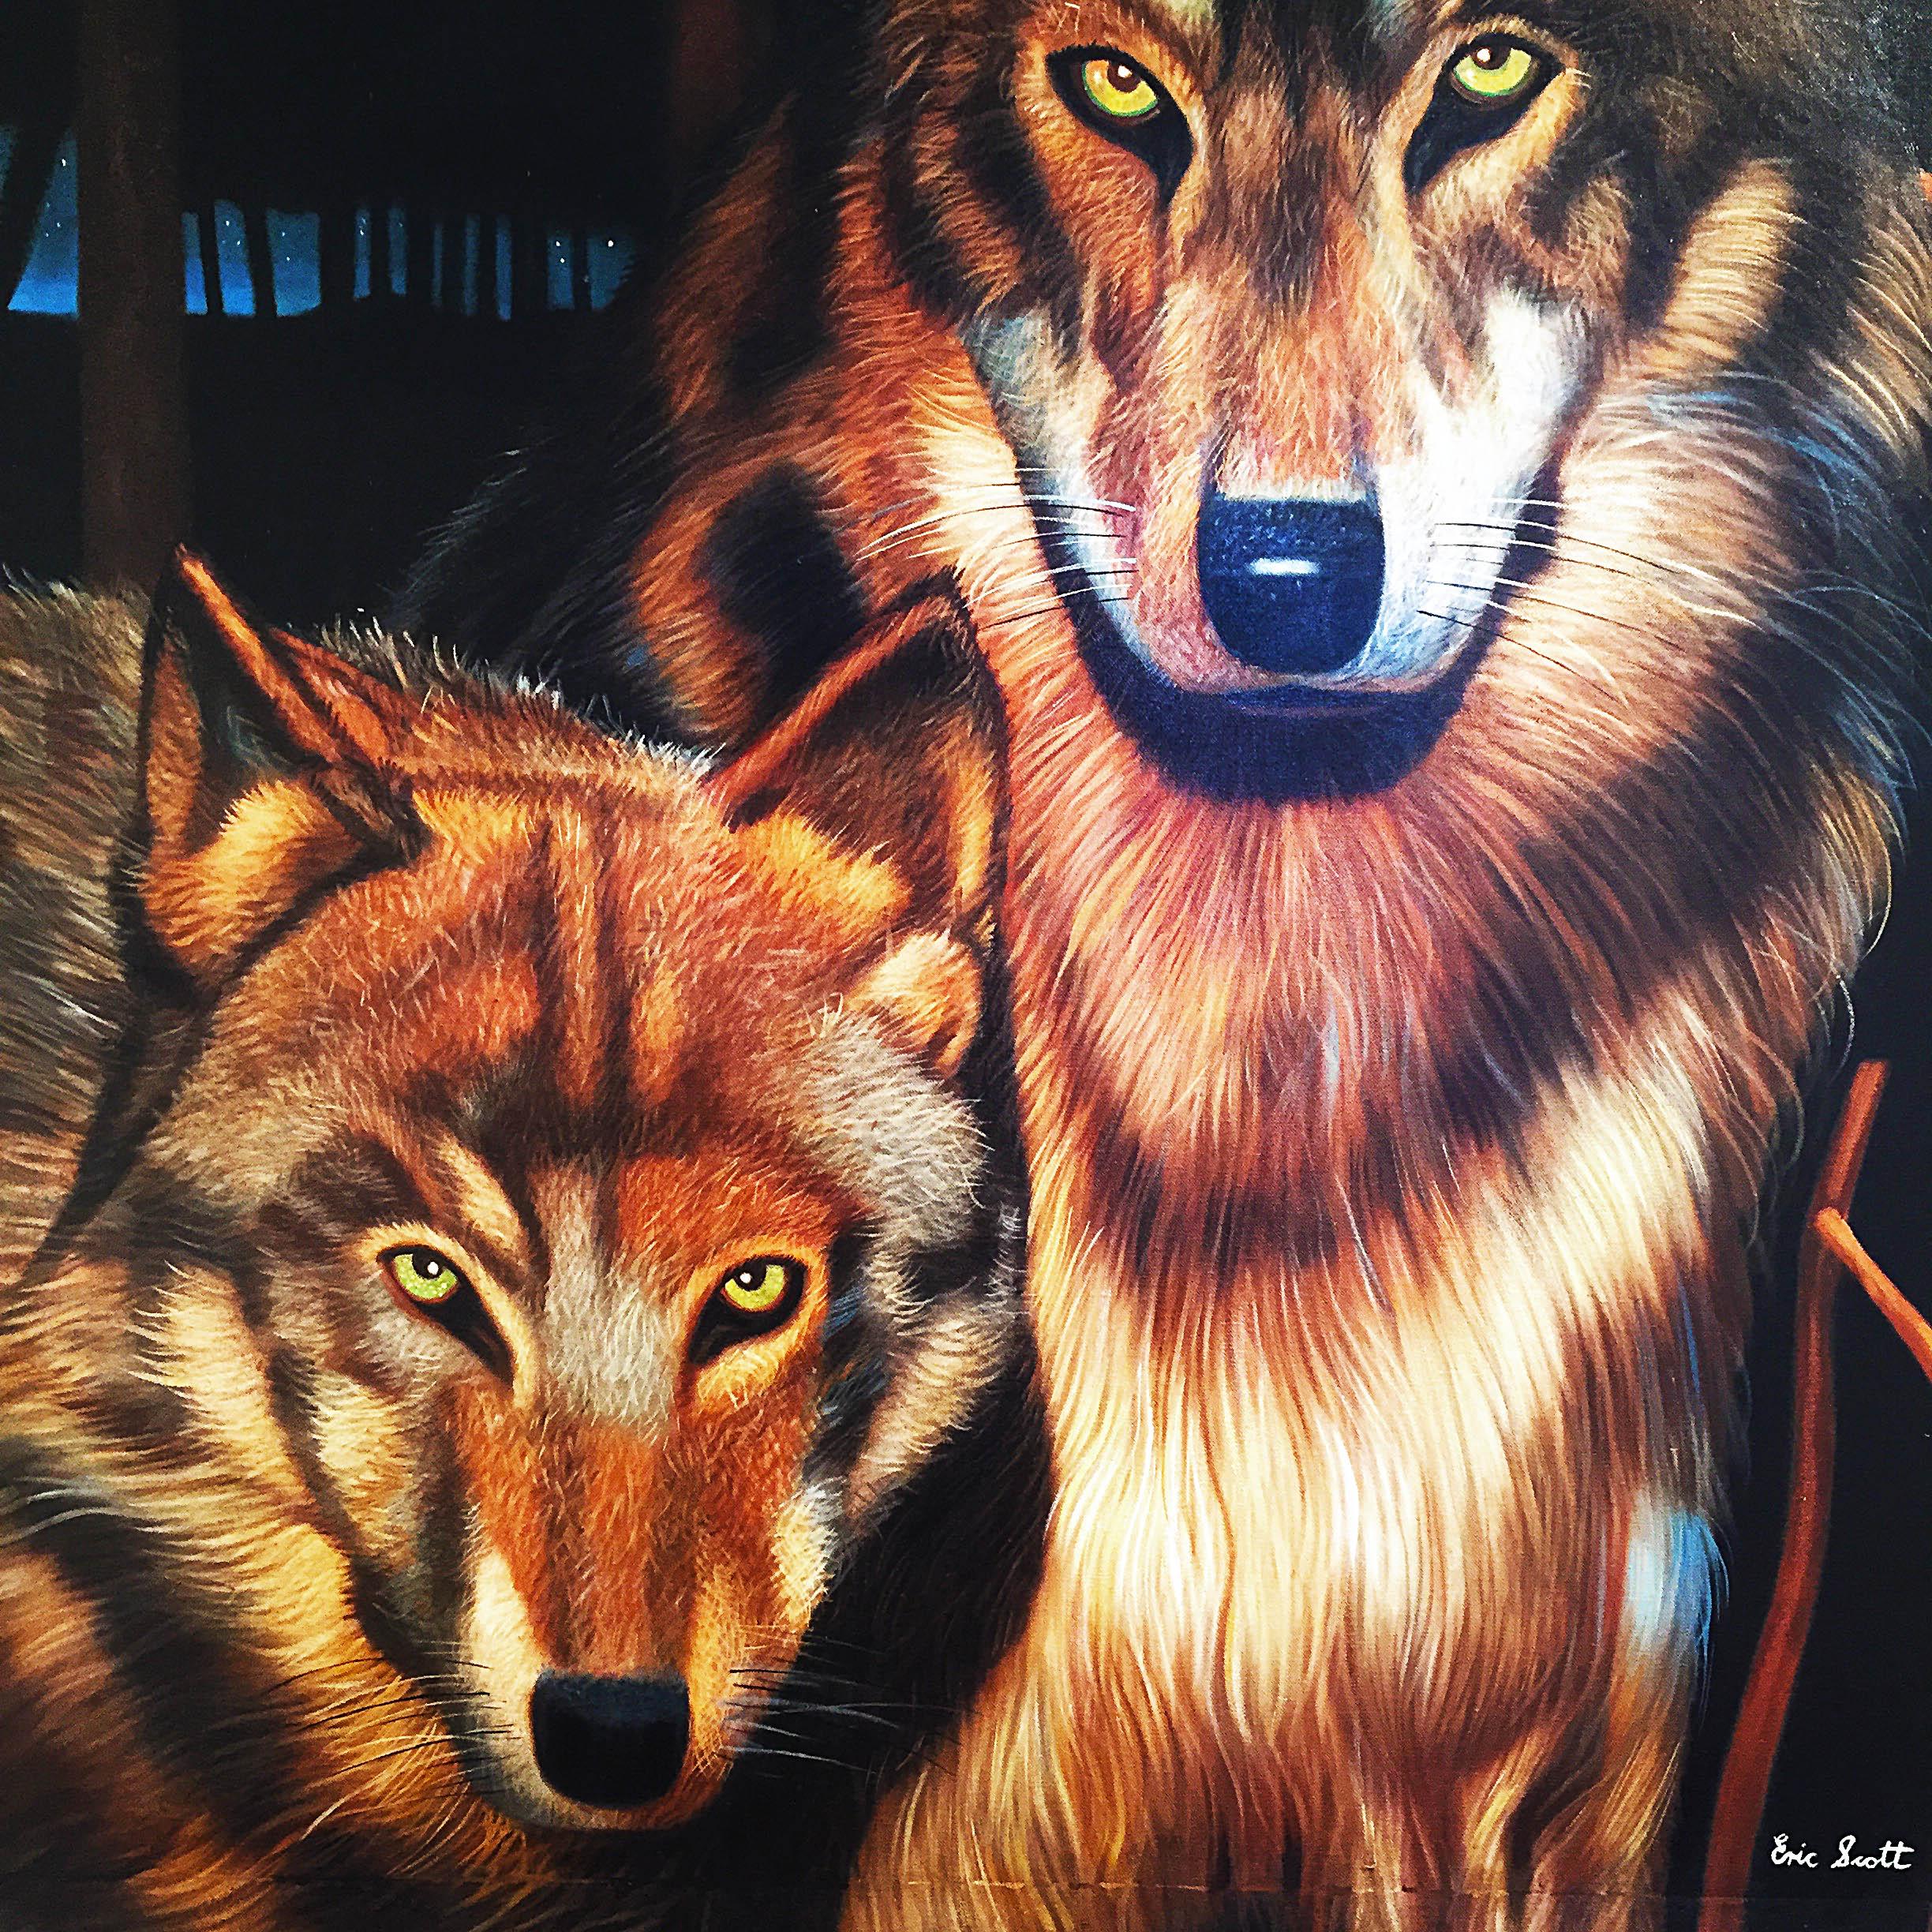 This impressive and captivating oil on canvas of hyperrealistic wolves is by the talented British artist Eric Scott (1945-2005), brother of the late Colin Scott. Eric Scott’s artworks almost always features subjects that are entirely out of